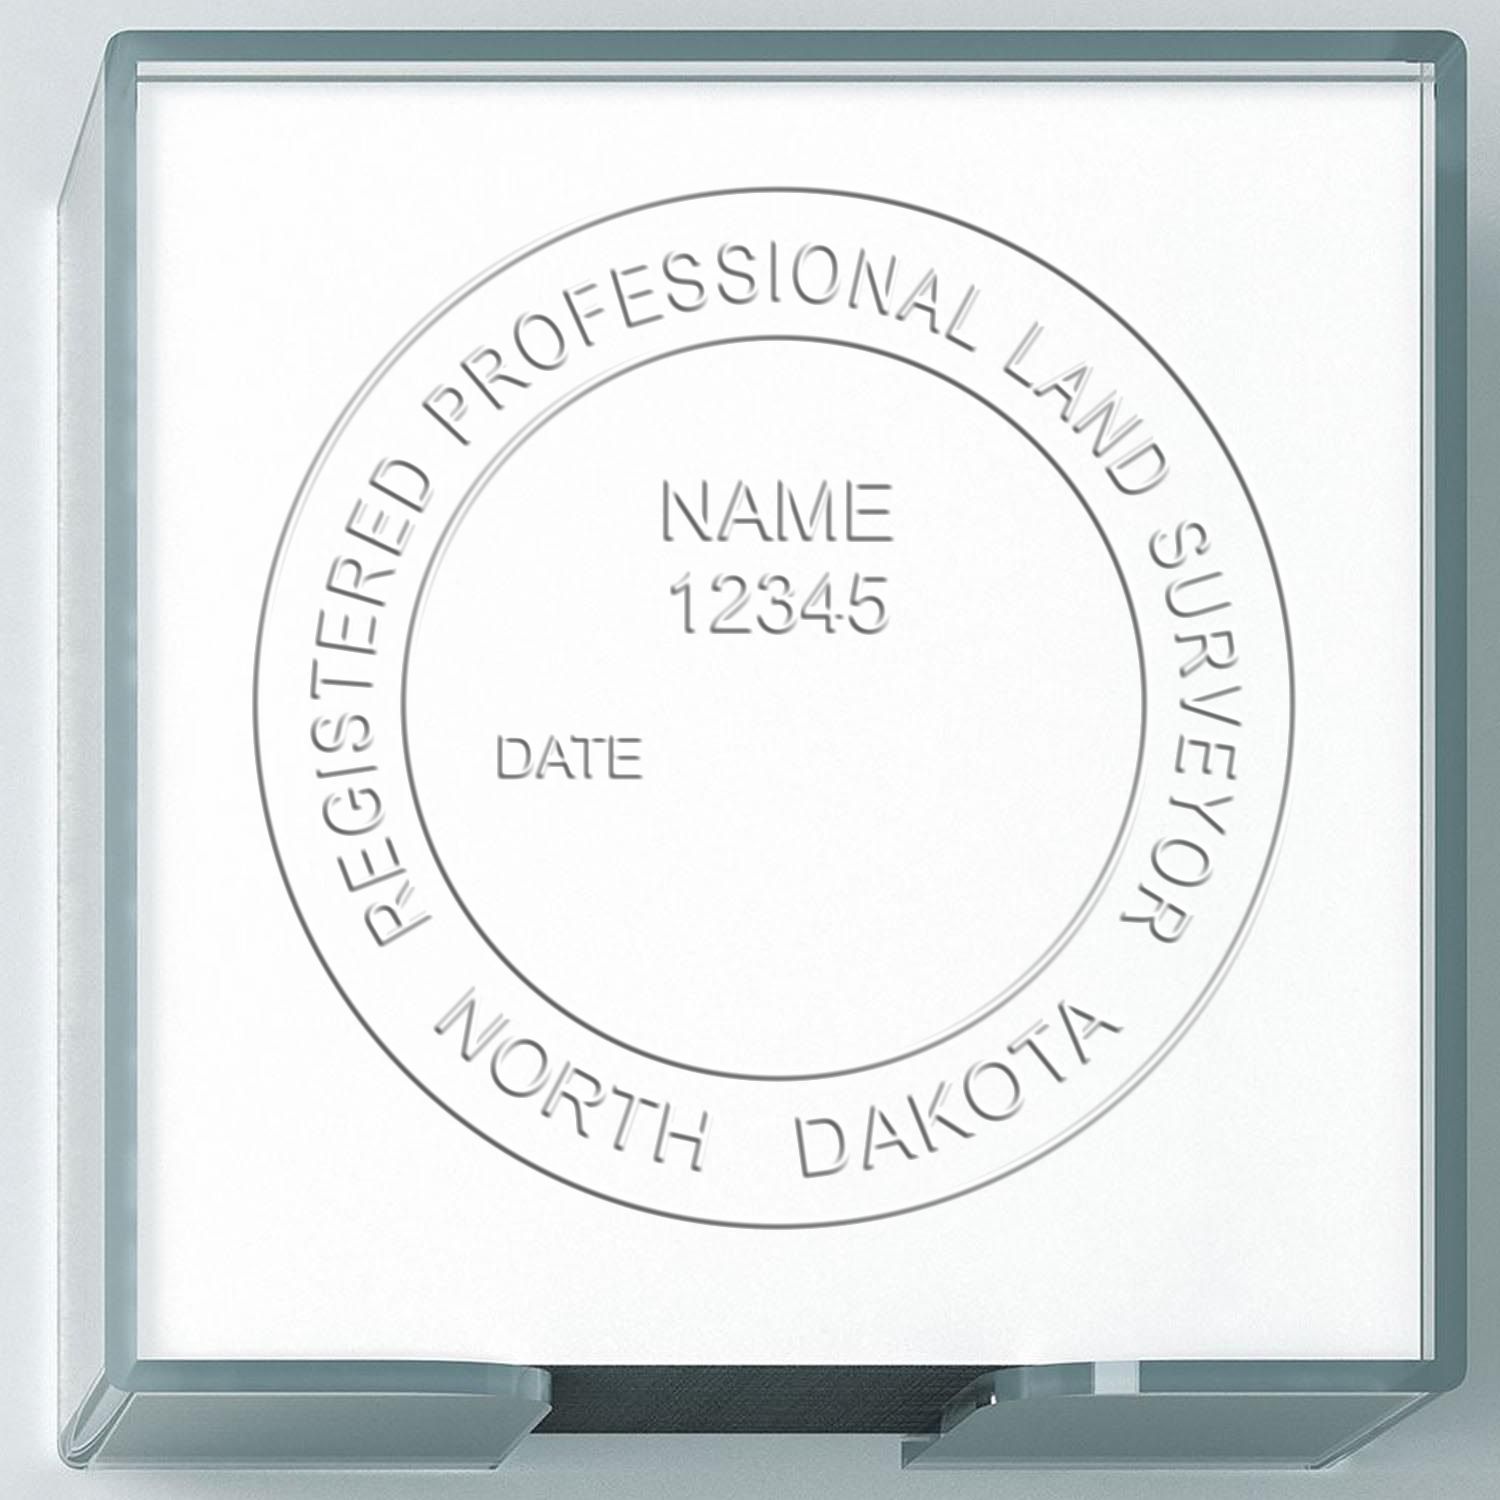 A lifestyle photo showing a stamped image of the Handheld North Dakota Land Surveyor Seal on a piece of paper